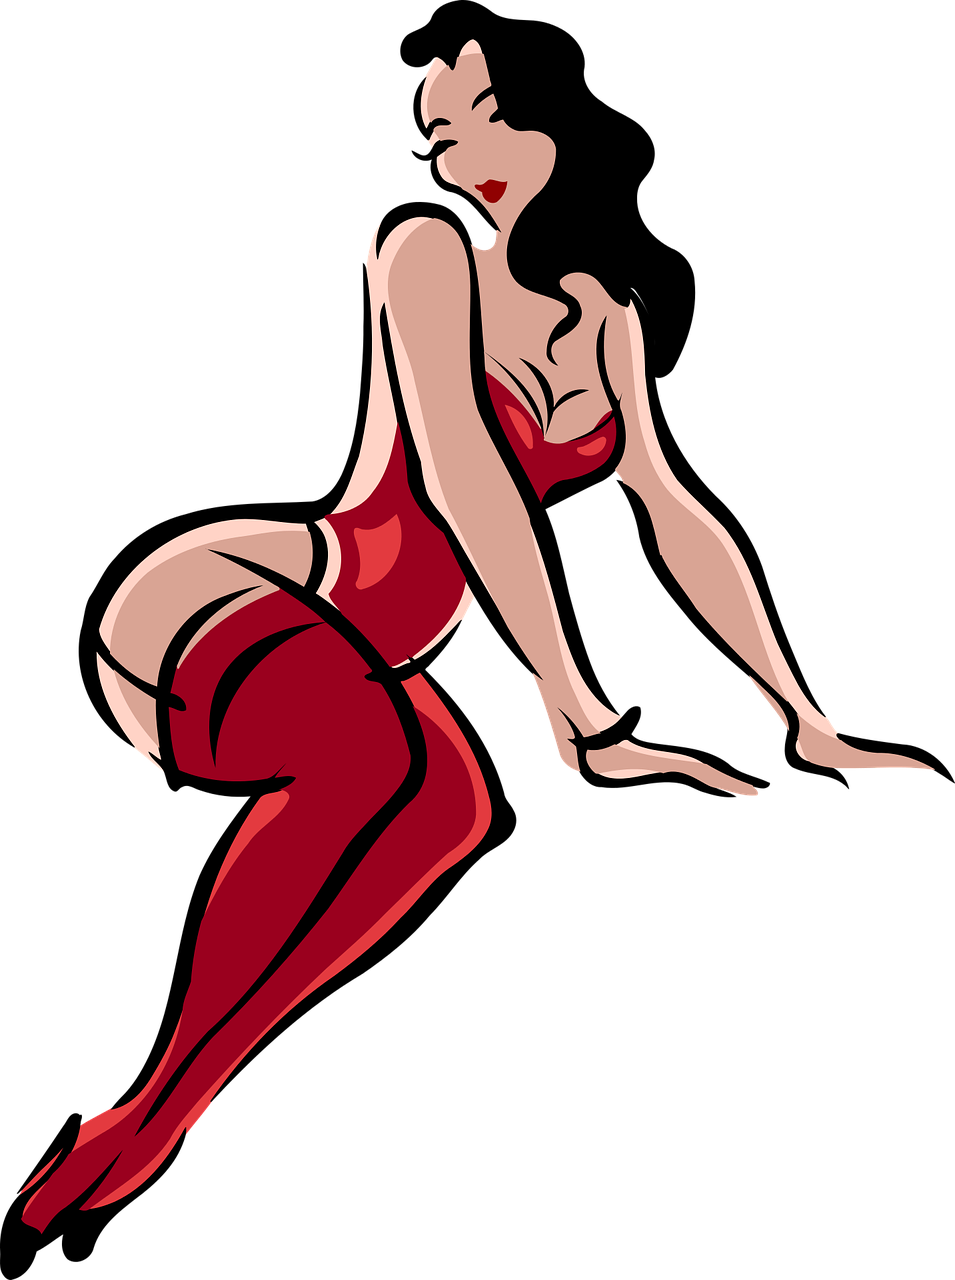 Abstract Girl Lady Lingerie PNG | Picpng.